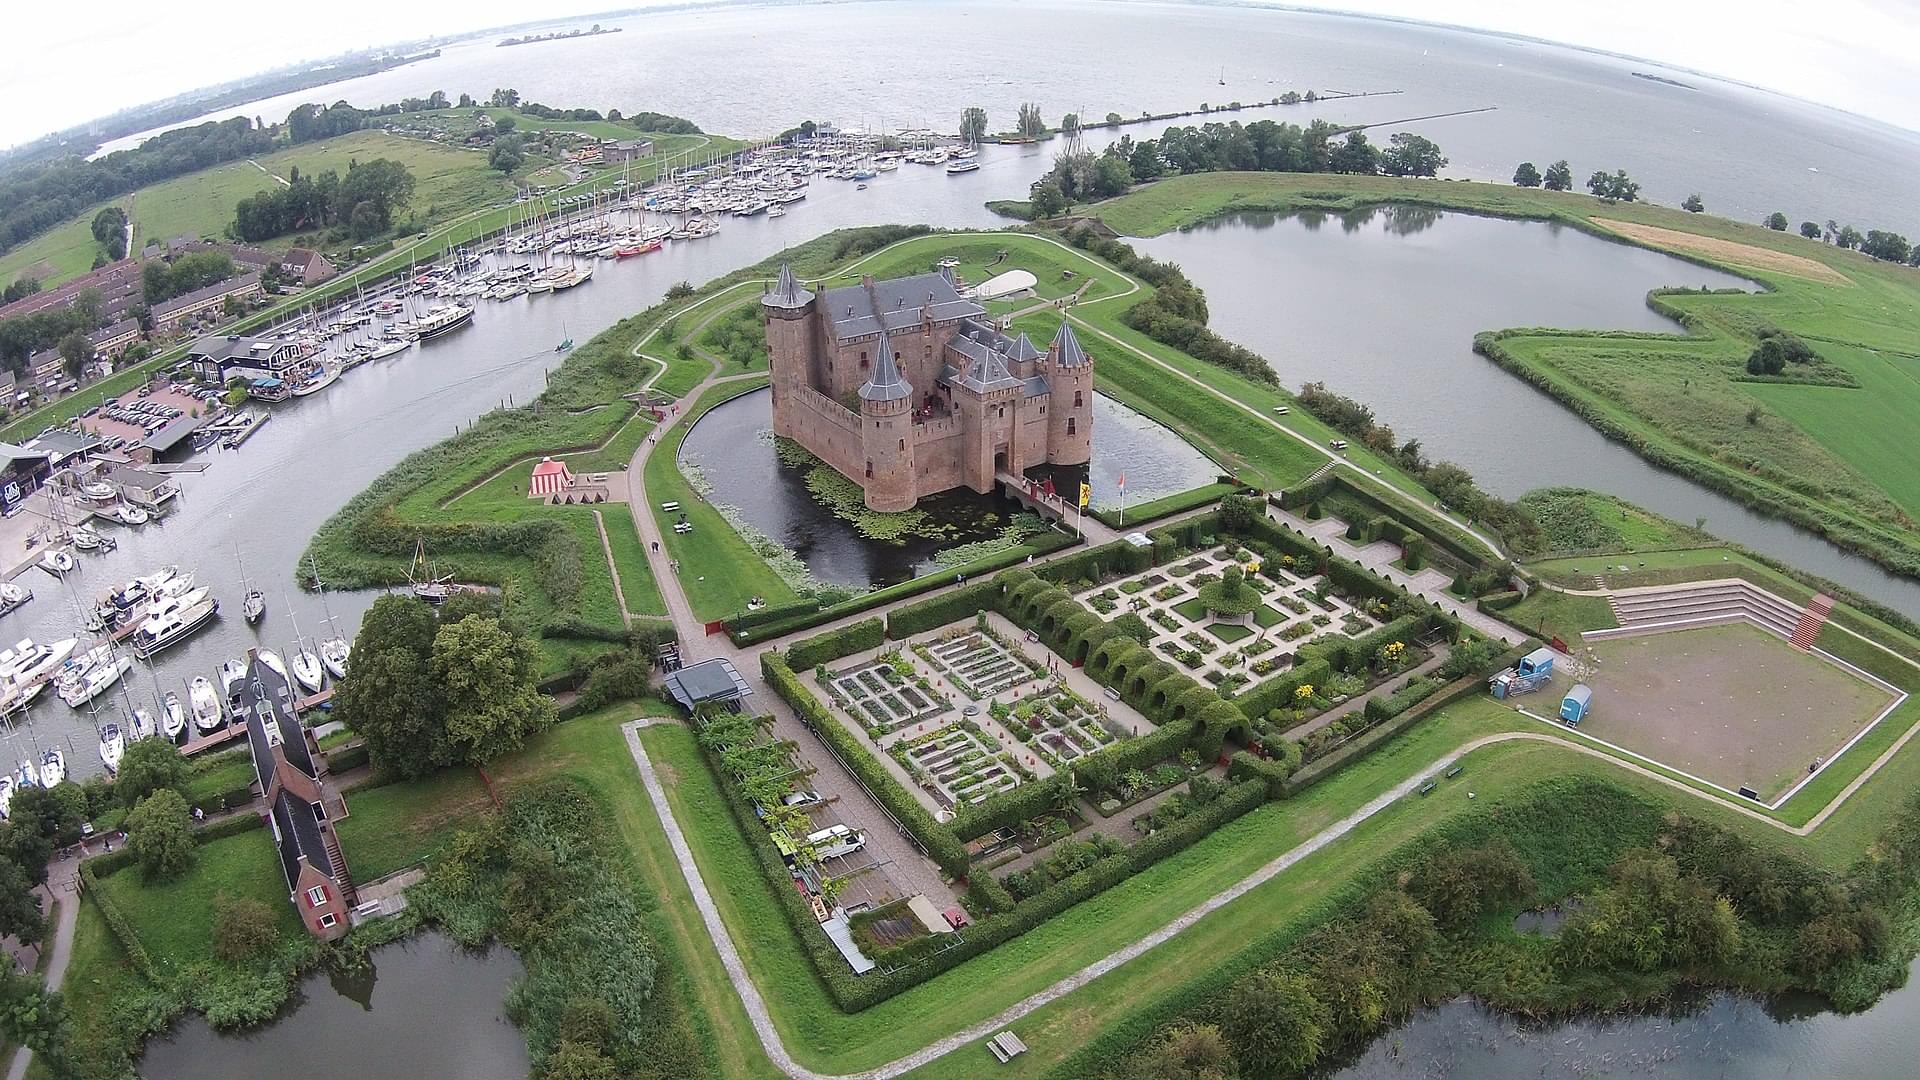 Explore one of the oldest and best-preserved castles